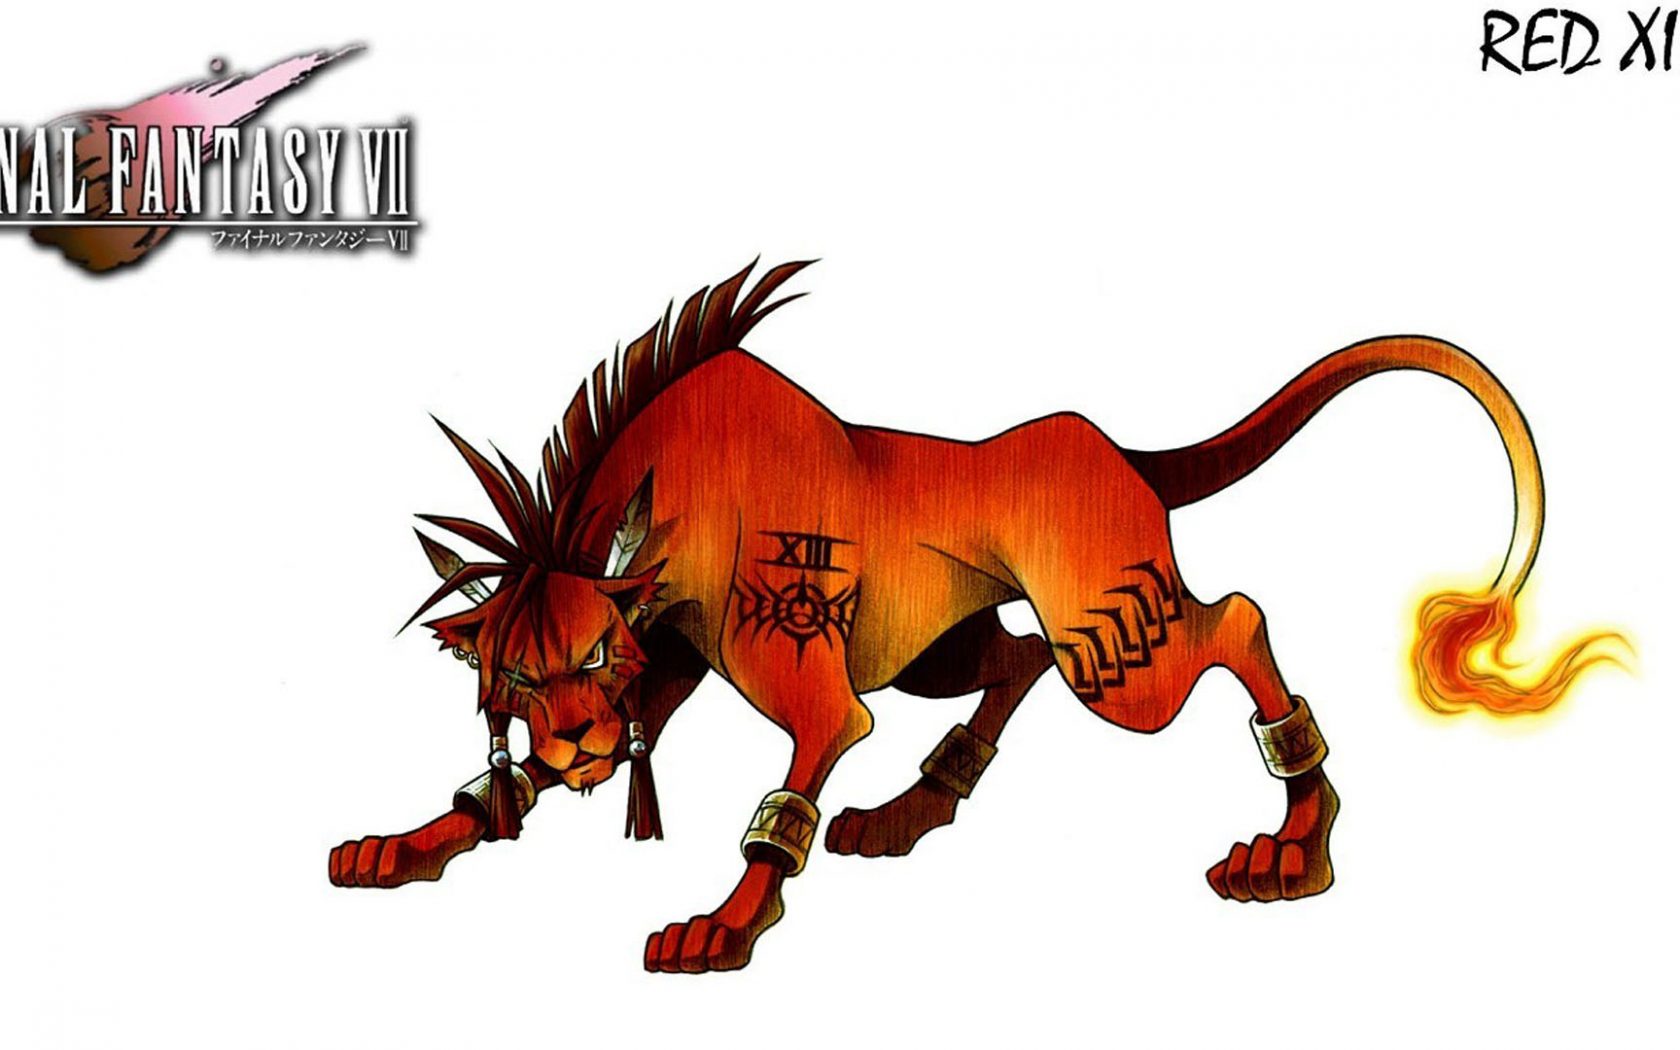 High Definition Wallpaper Of Nanaki Red Xiii From Final Fantasy